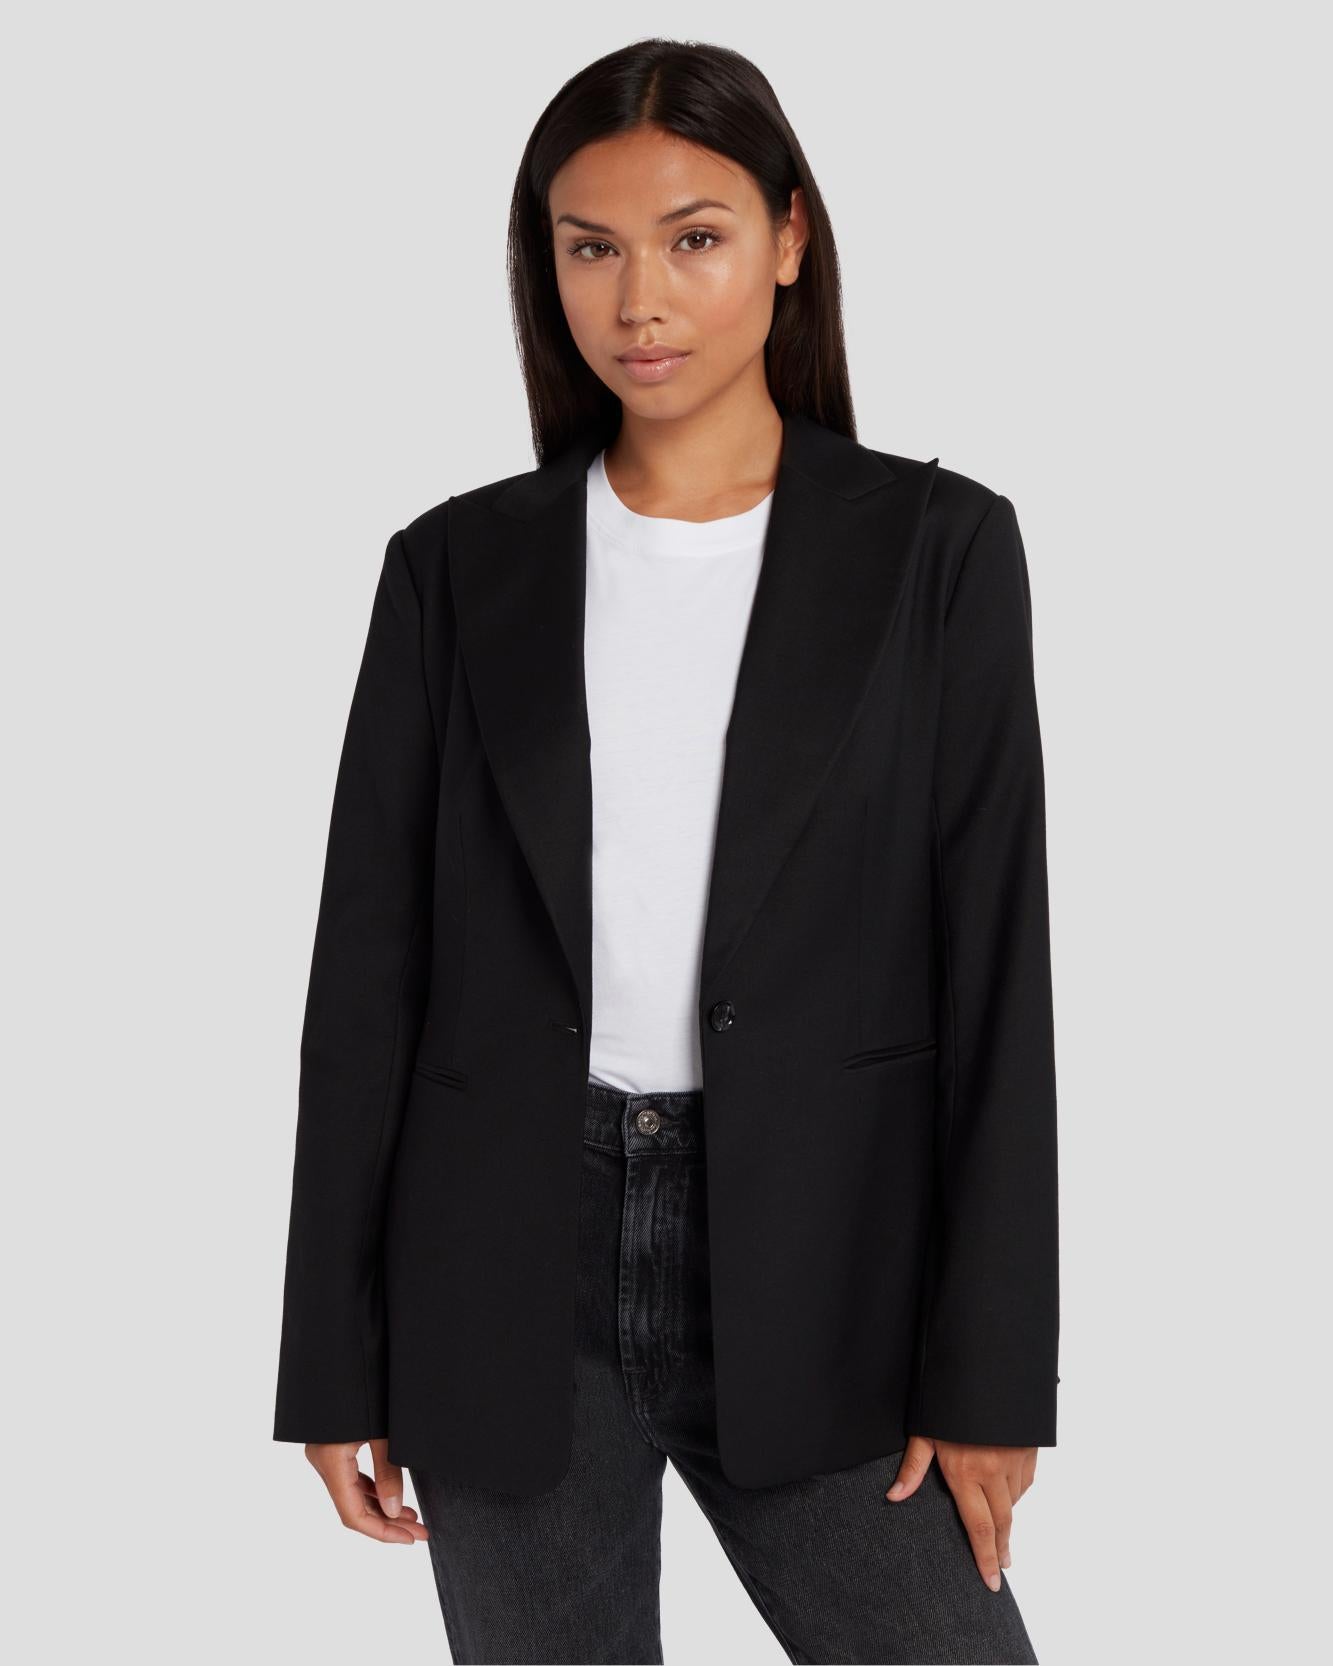 7 For All Mankind Single Breasted Blazer in Black 7N949F37BLK